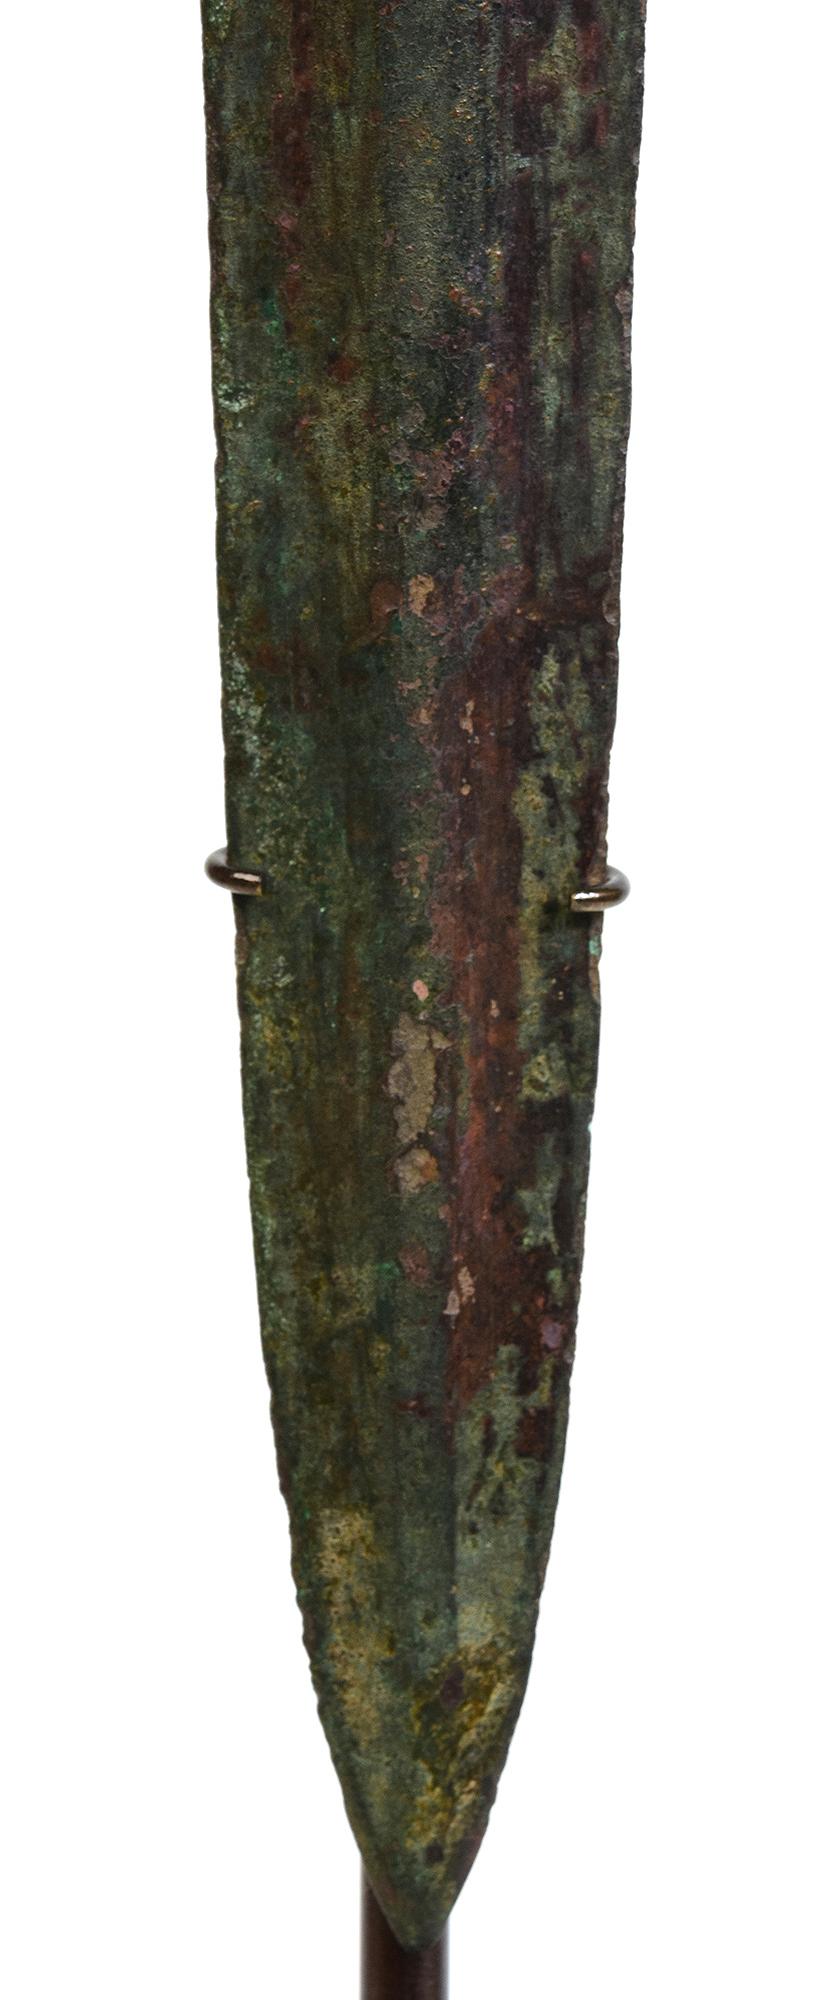 Metalwork Ancient Antique Luristan Bronze Sword / Knife / Dagger / Early Iron Age Weapon For Sale